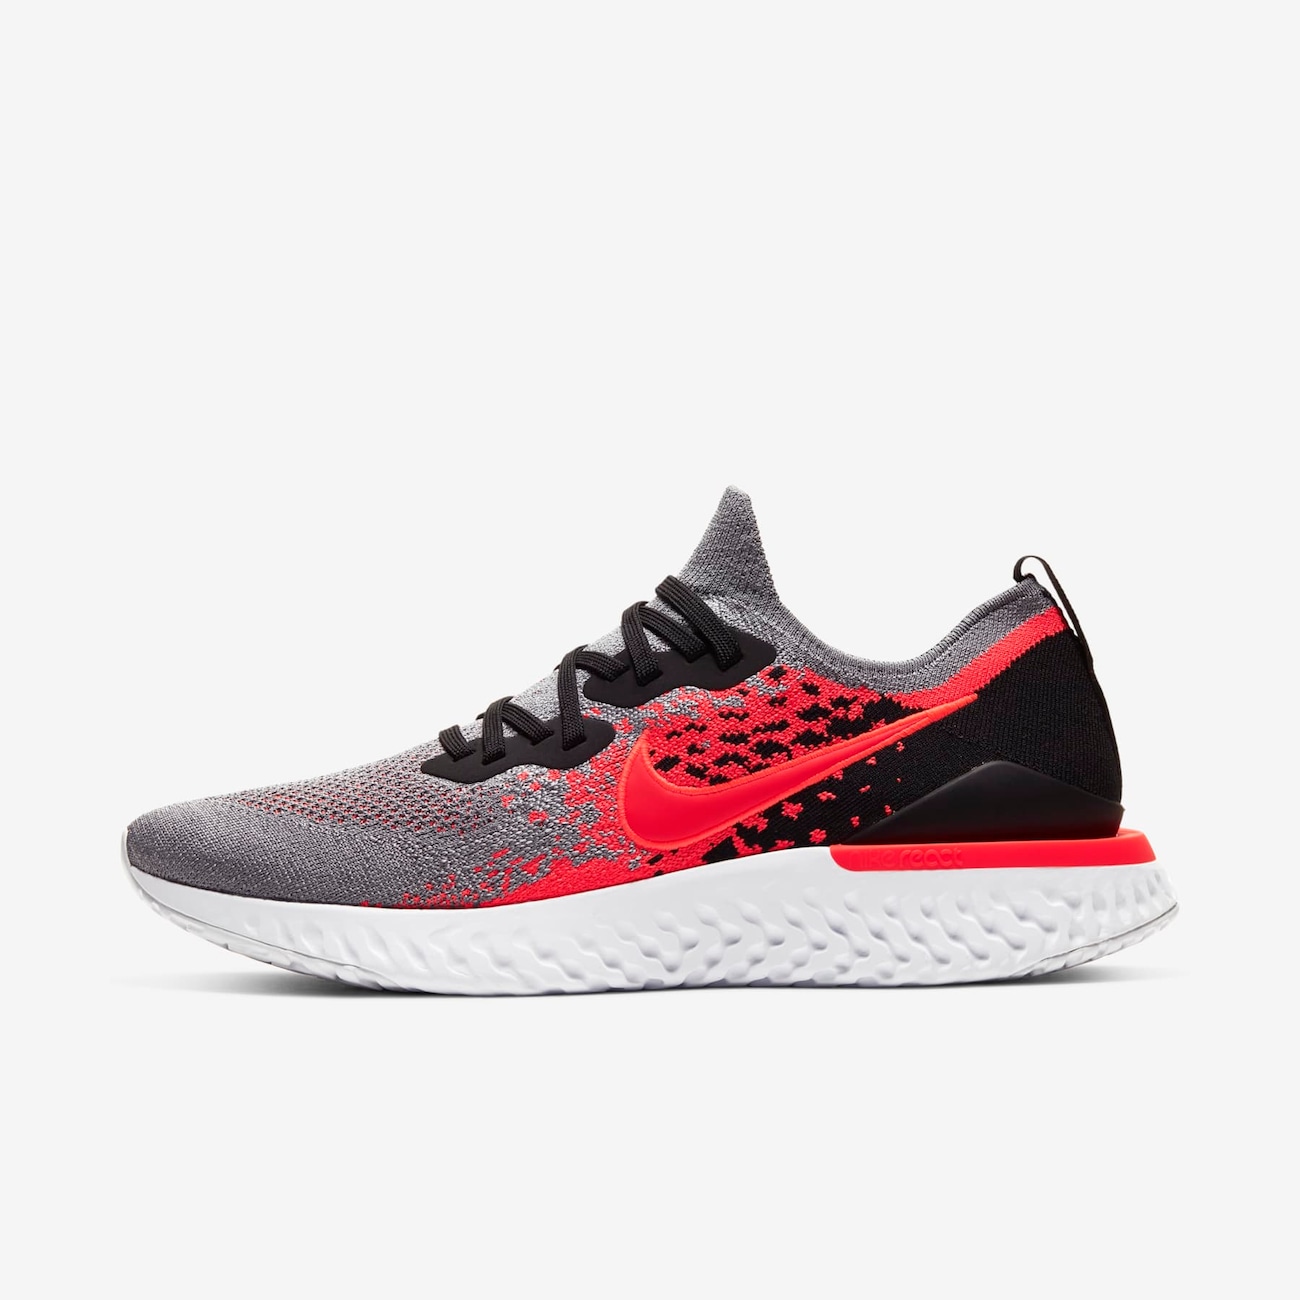 Nike Epic React Flyknit Cheapest Selling, 63% OFF | maikyaulaw.com